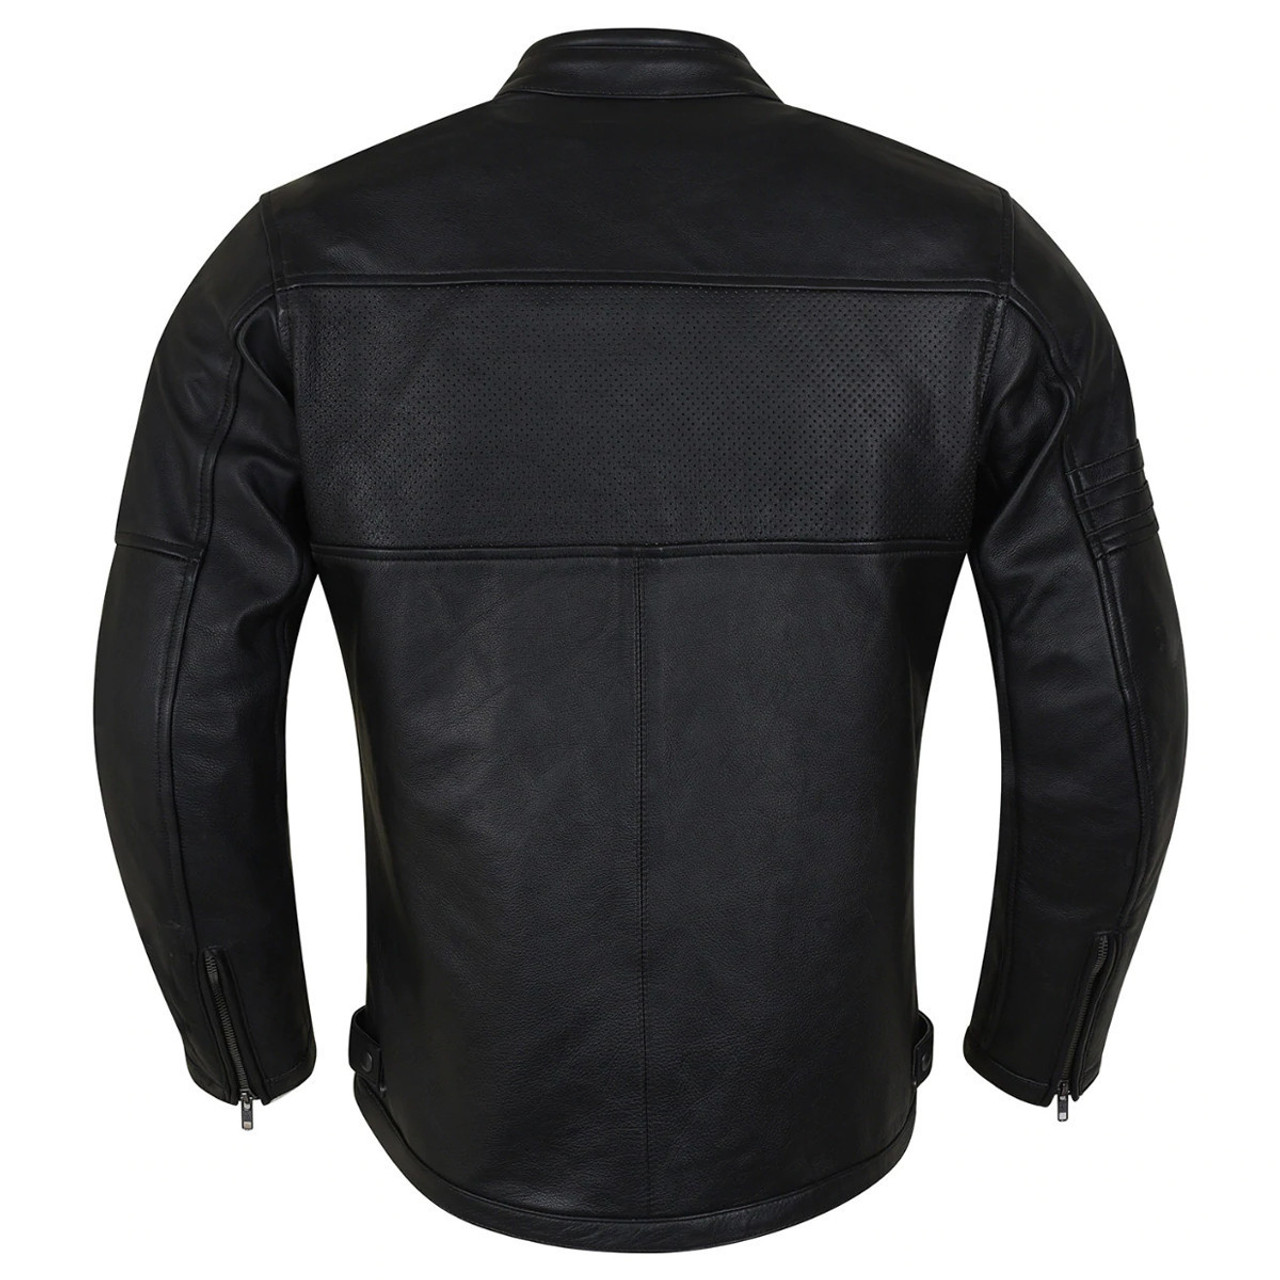 Dean Jacket in Black  Motorcycle outfit, Mens outfits, Biker outfit